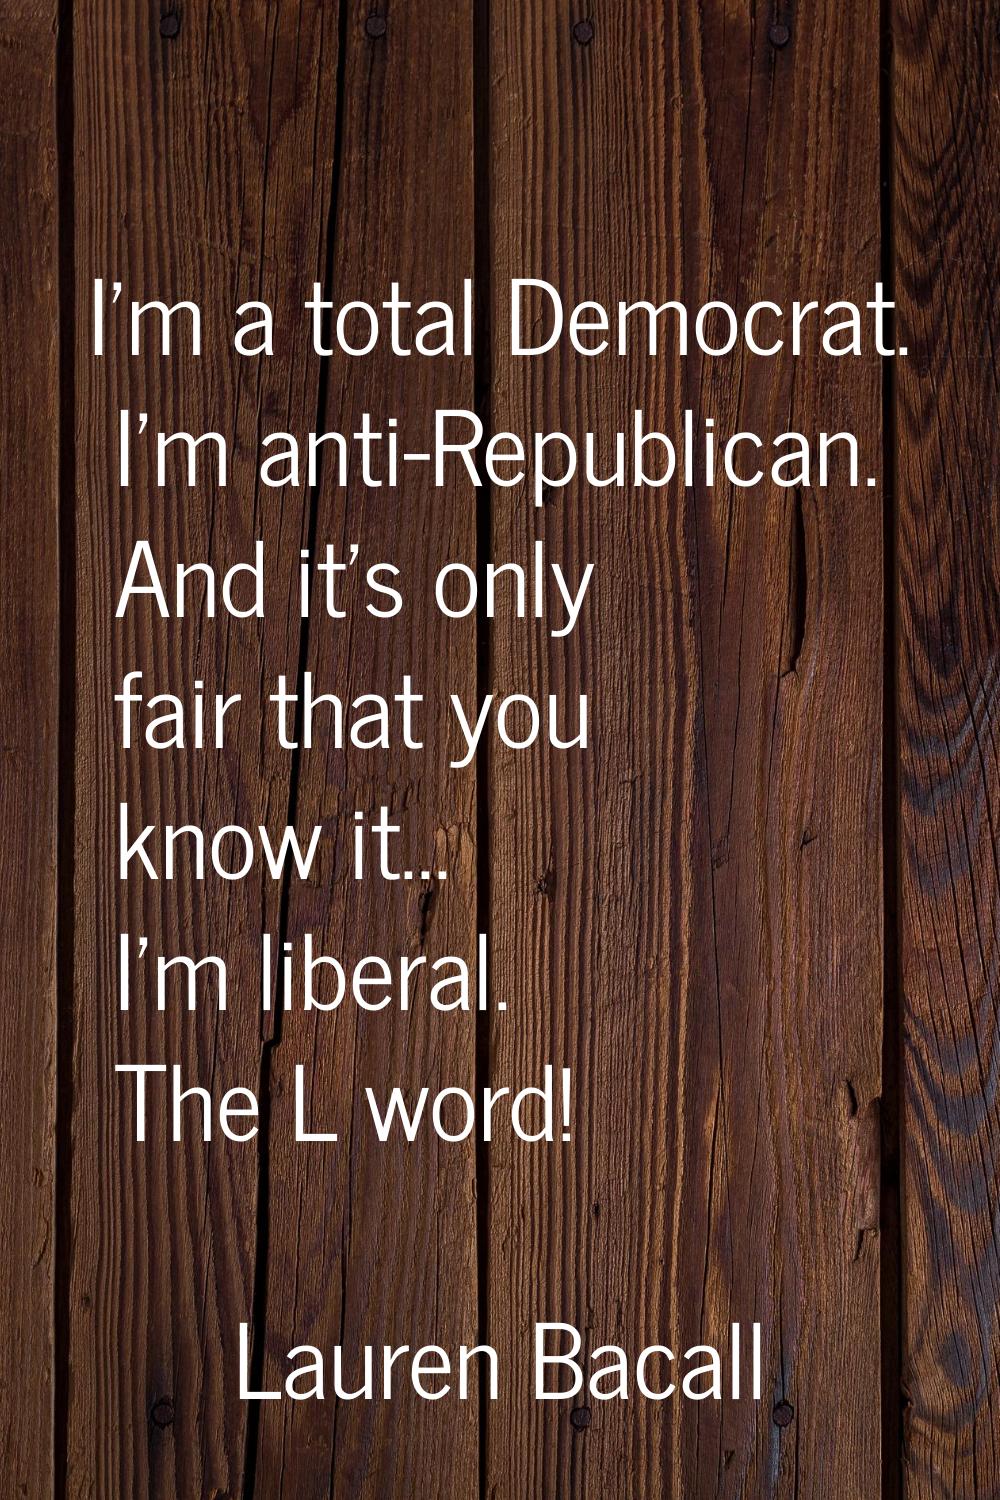 I'm a total Democrat. I'm anti-Republican. And it's only fair that you know it... I'm liberal. The 